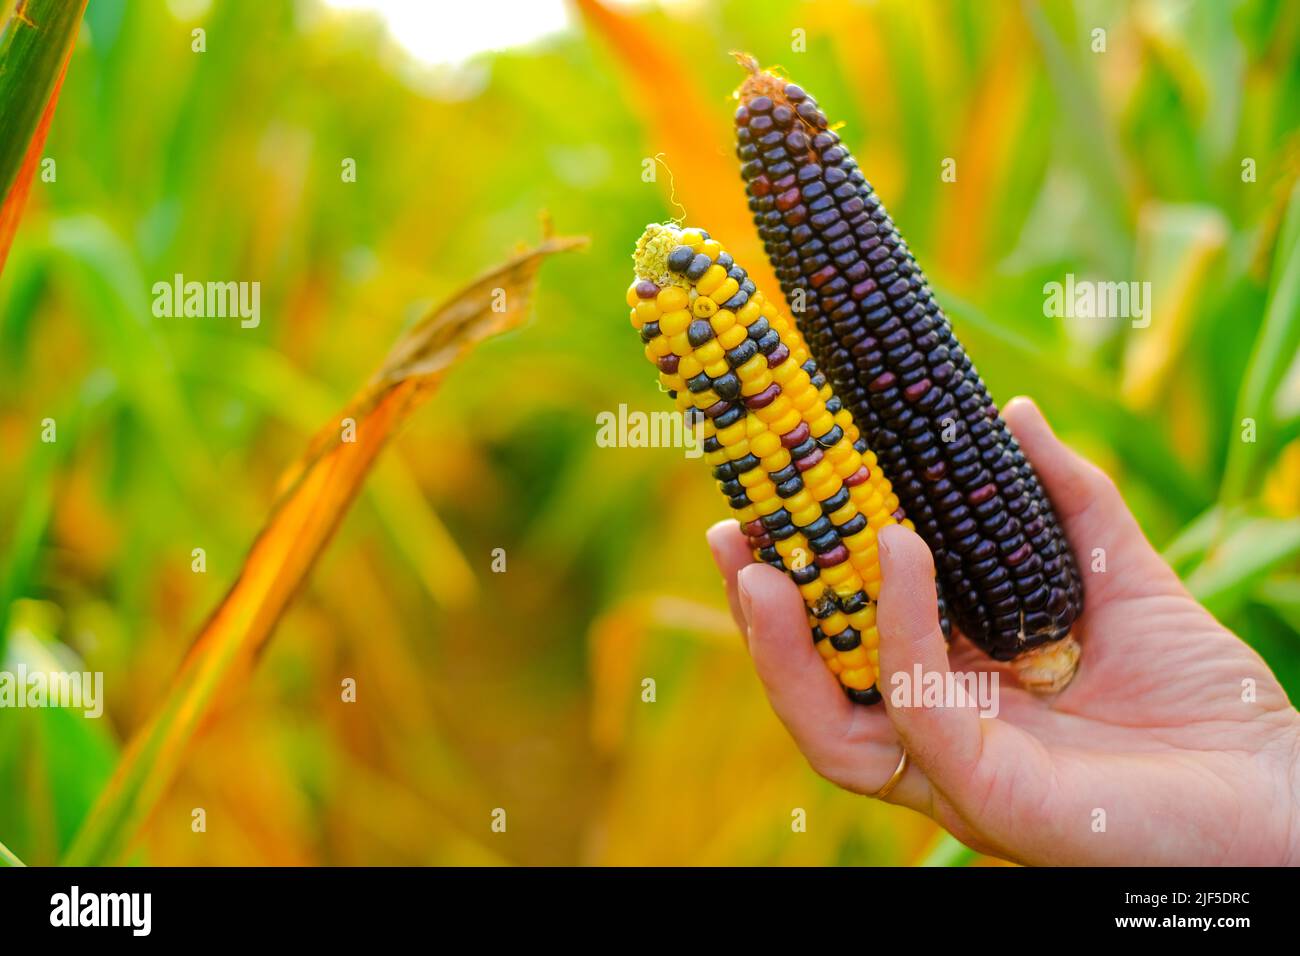 Corn harvest season.Cob of multicolored corn in hands on field background.farmer in a corn field harvests. Corn cobs of different colors.Food and food Stock Photo